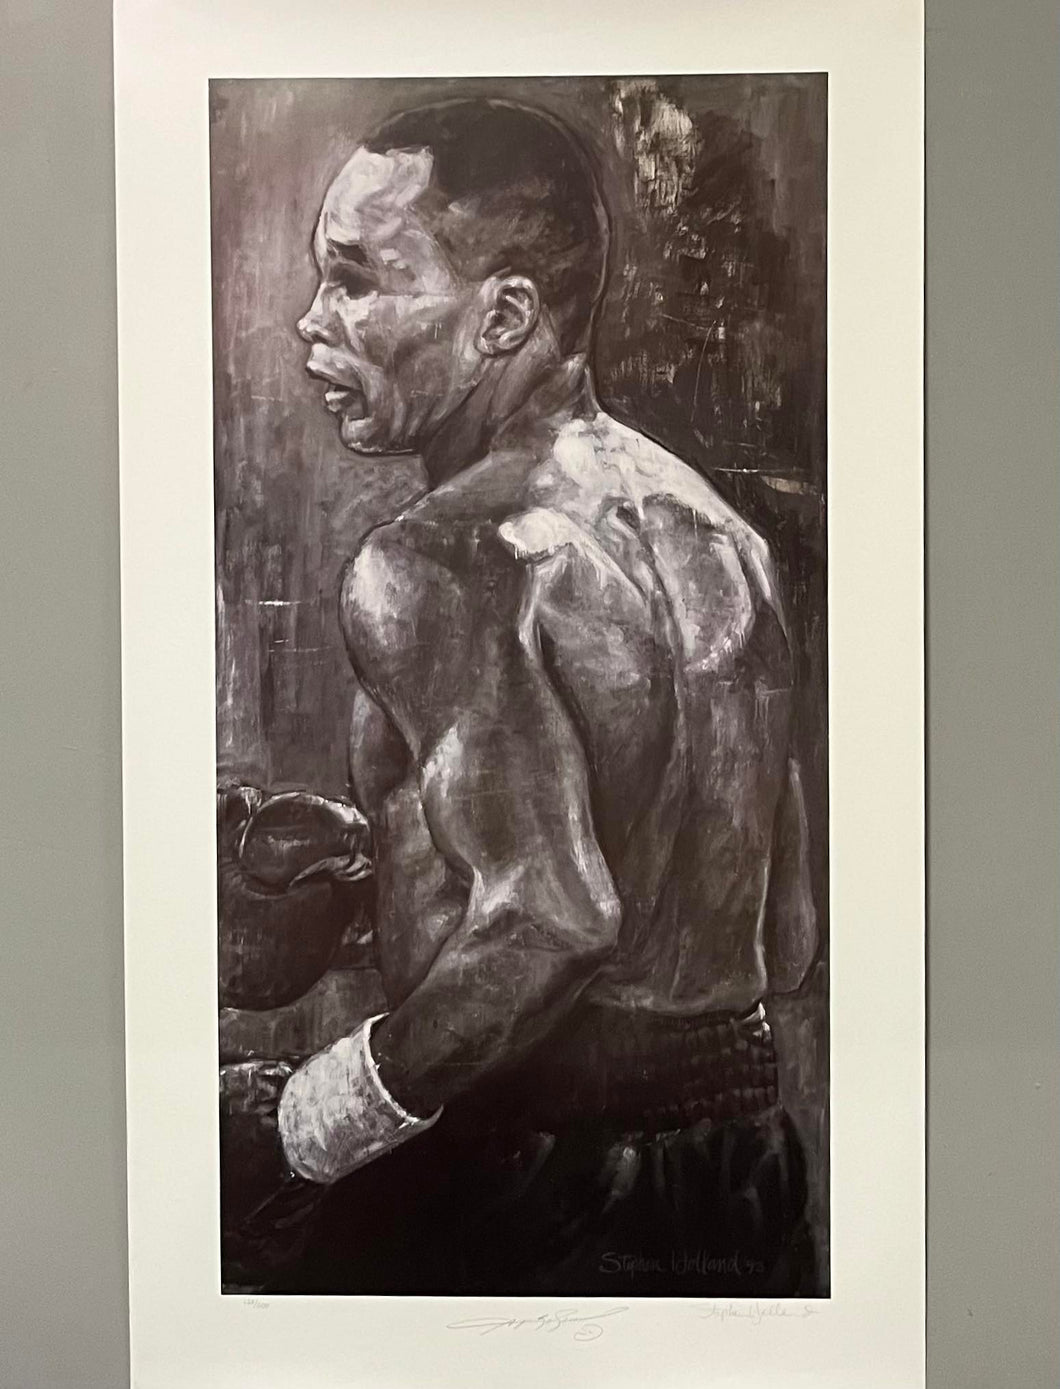 Stephen Holland Limited Edition Lithograph Sugar Ray Leonard 128/500 - Personally Signed